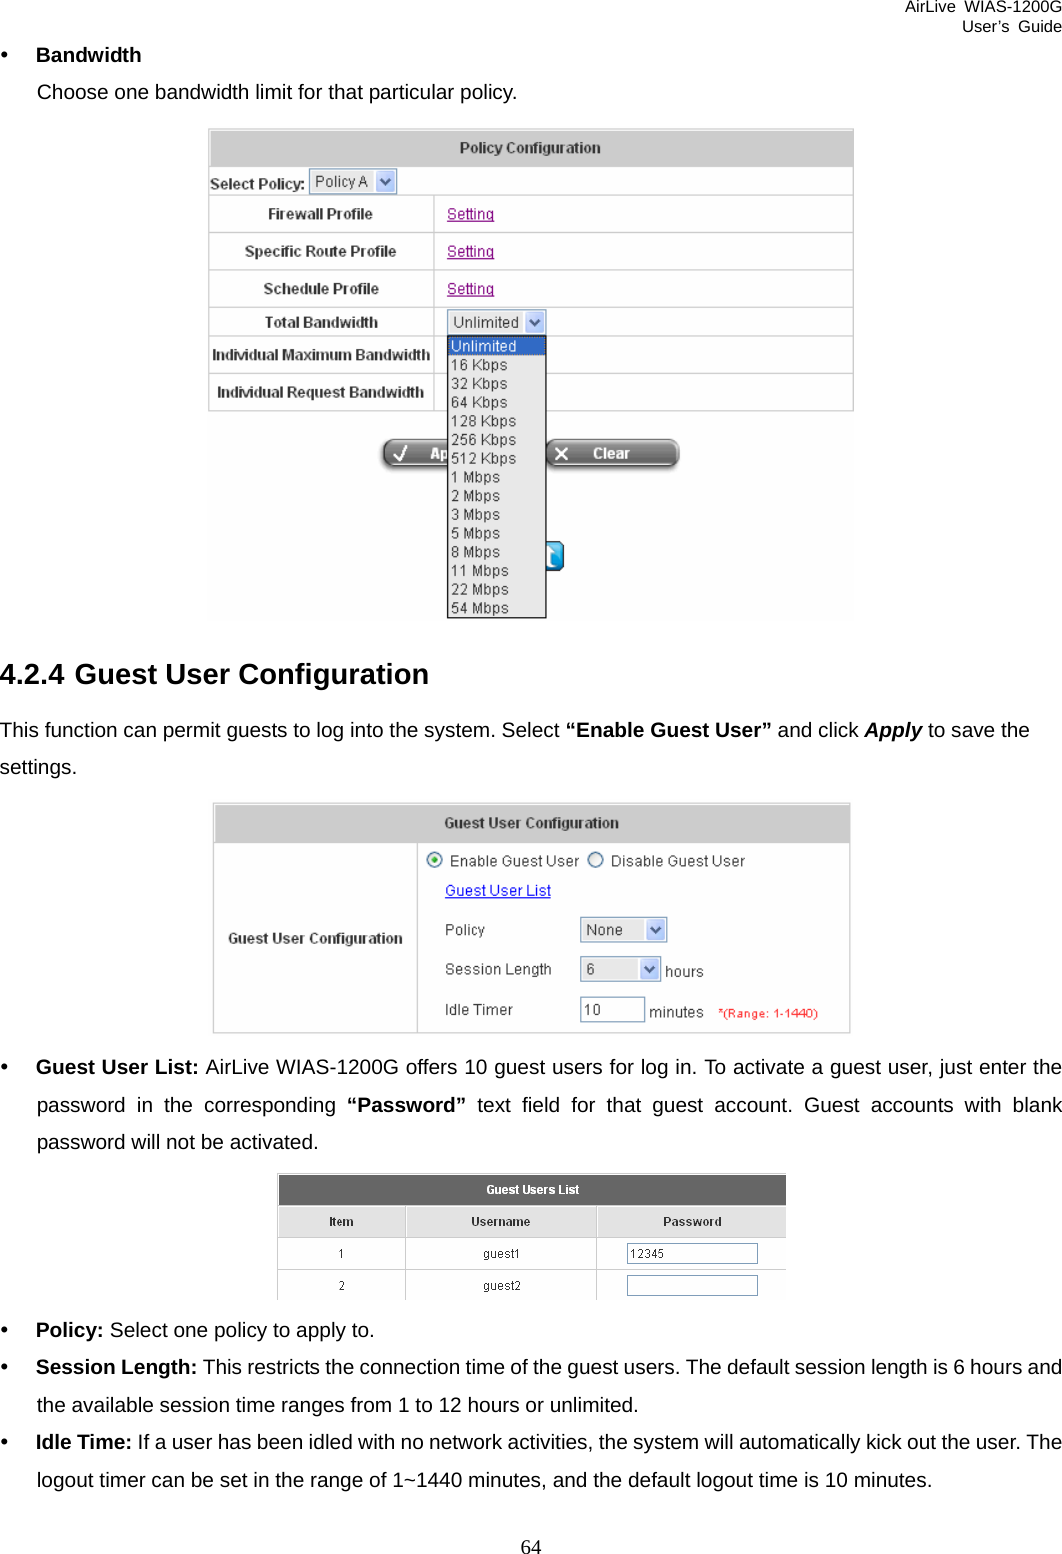 AirLive WIAS-1200G User’s Guide 64 y Bandwidth Choose one bandwidth limit for that particular policy.  4.2.4 Guest User Configuration This function can permit guests to log into the system. Select “Enable Guest User” and click Apply to save the settings.  y Guest User List: AirLive WIAS-1200G offers 10 guest users for log in. To activate a guest user, just enter the password in the corresponding “Password” text field for that guest account. Guest accounts with blank password will not be activated.  y Policy: Select one policy to apply to. y Session Length: This restricts the connection time of the guest users. The default session length is 6 hours and the available session time ranges from 1 to 12 hours or unlimited. y Idle Time: If a user has been idled with no network activities, the system will automatically kick out the user. The logout timer can be set in the range of 1~1440 minutes, and the default logout time is 10 minutes.  